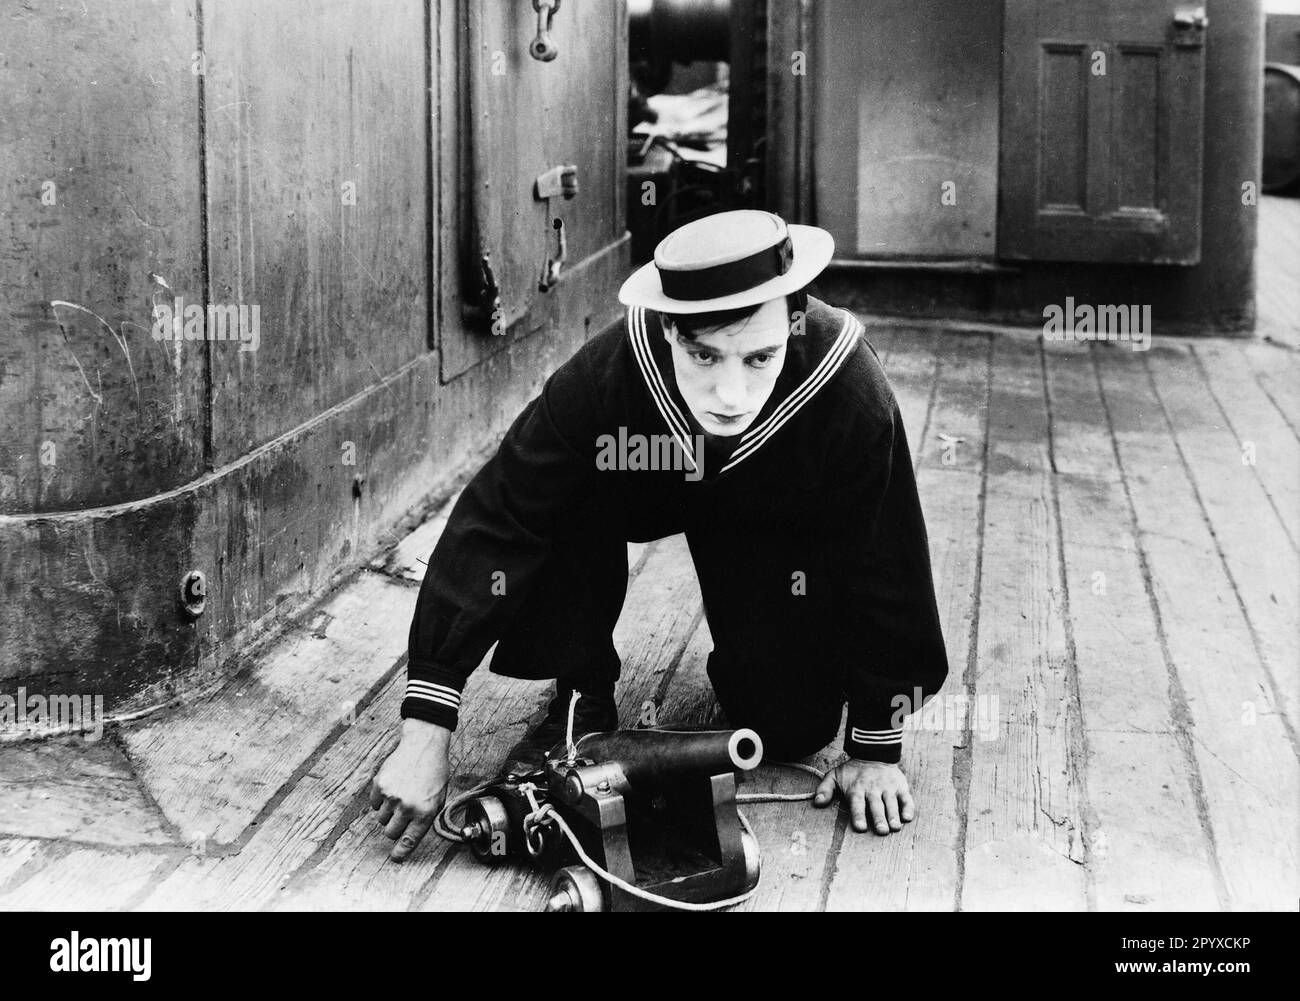 Buster Keaton as Rollo Treadway in 'On the High Seas', original title: 'The Navigator', directed by Donald Crisp and Buster Keaton, USA 1924. [automated translation] Stock Photo